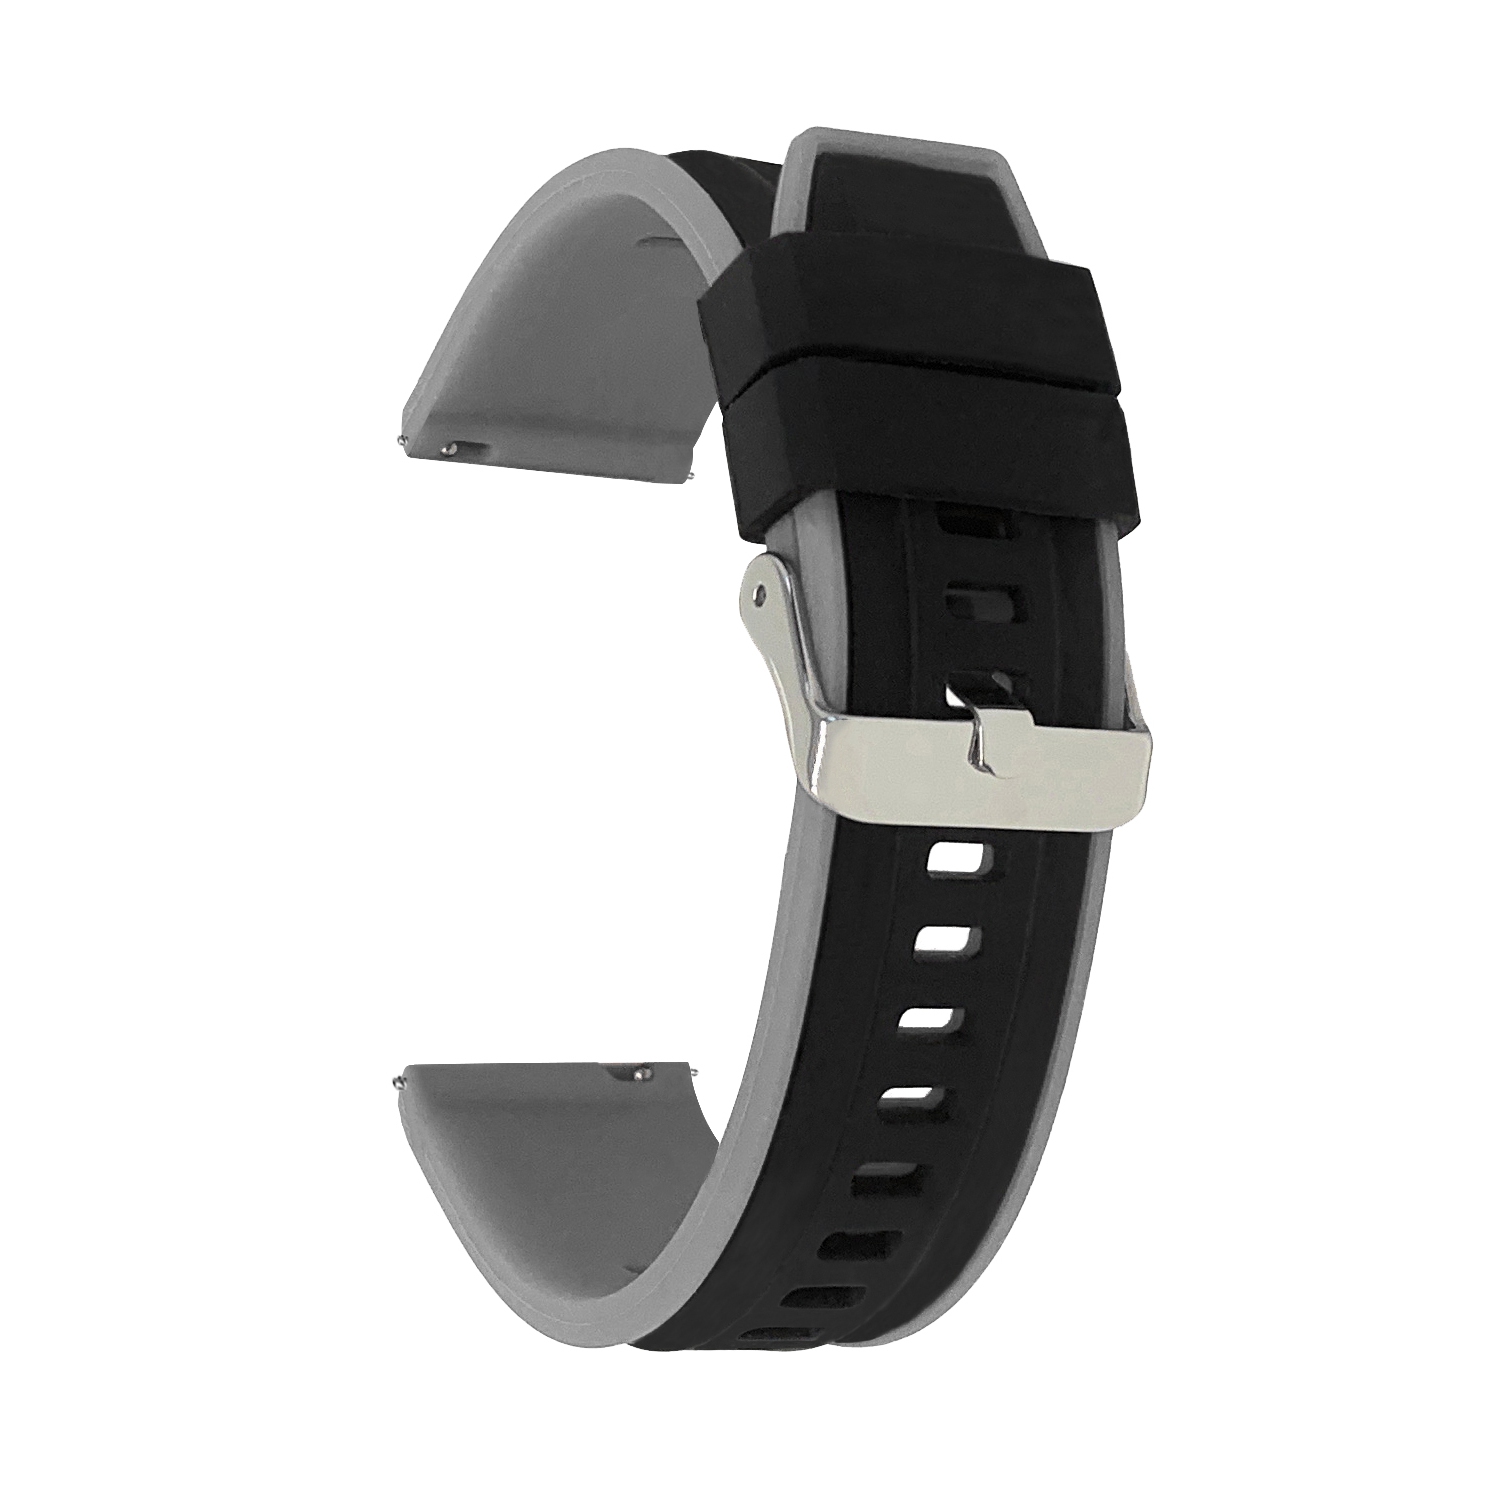 Bandini Quick Release Two-Tone Rubber Silicone Smart Watch Strap For Amazfit Bip, U, S, Lite, GTR 42mm, GTS - 20mm, Black / Grey / Silver Buckle